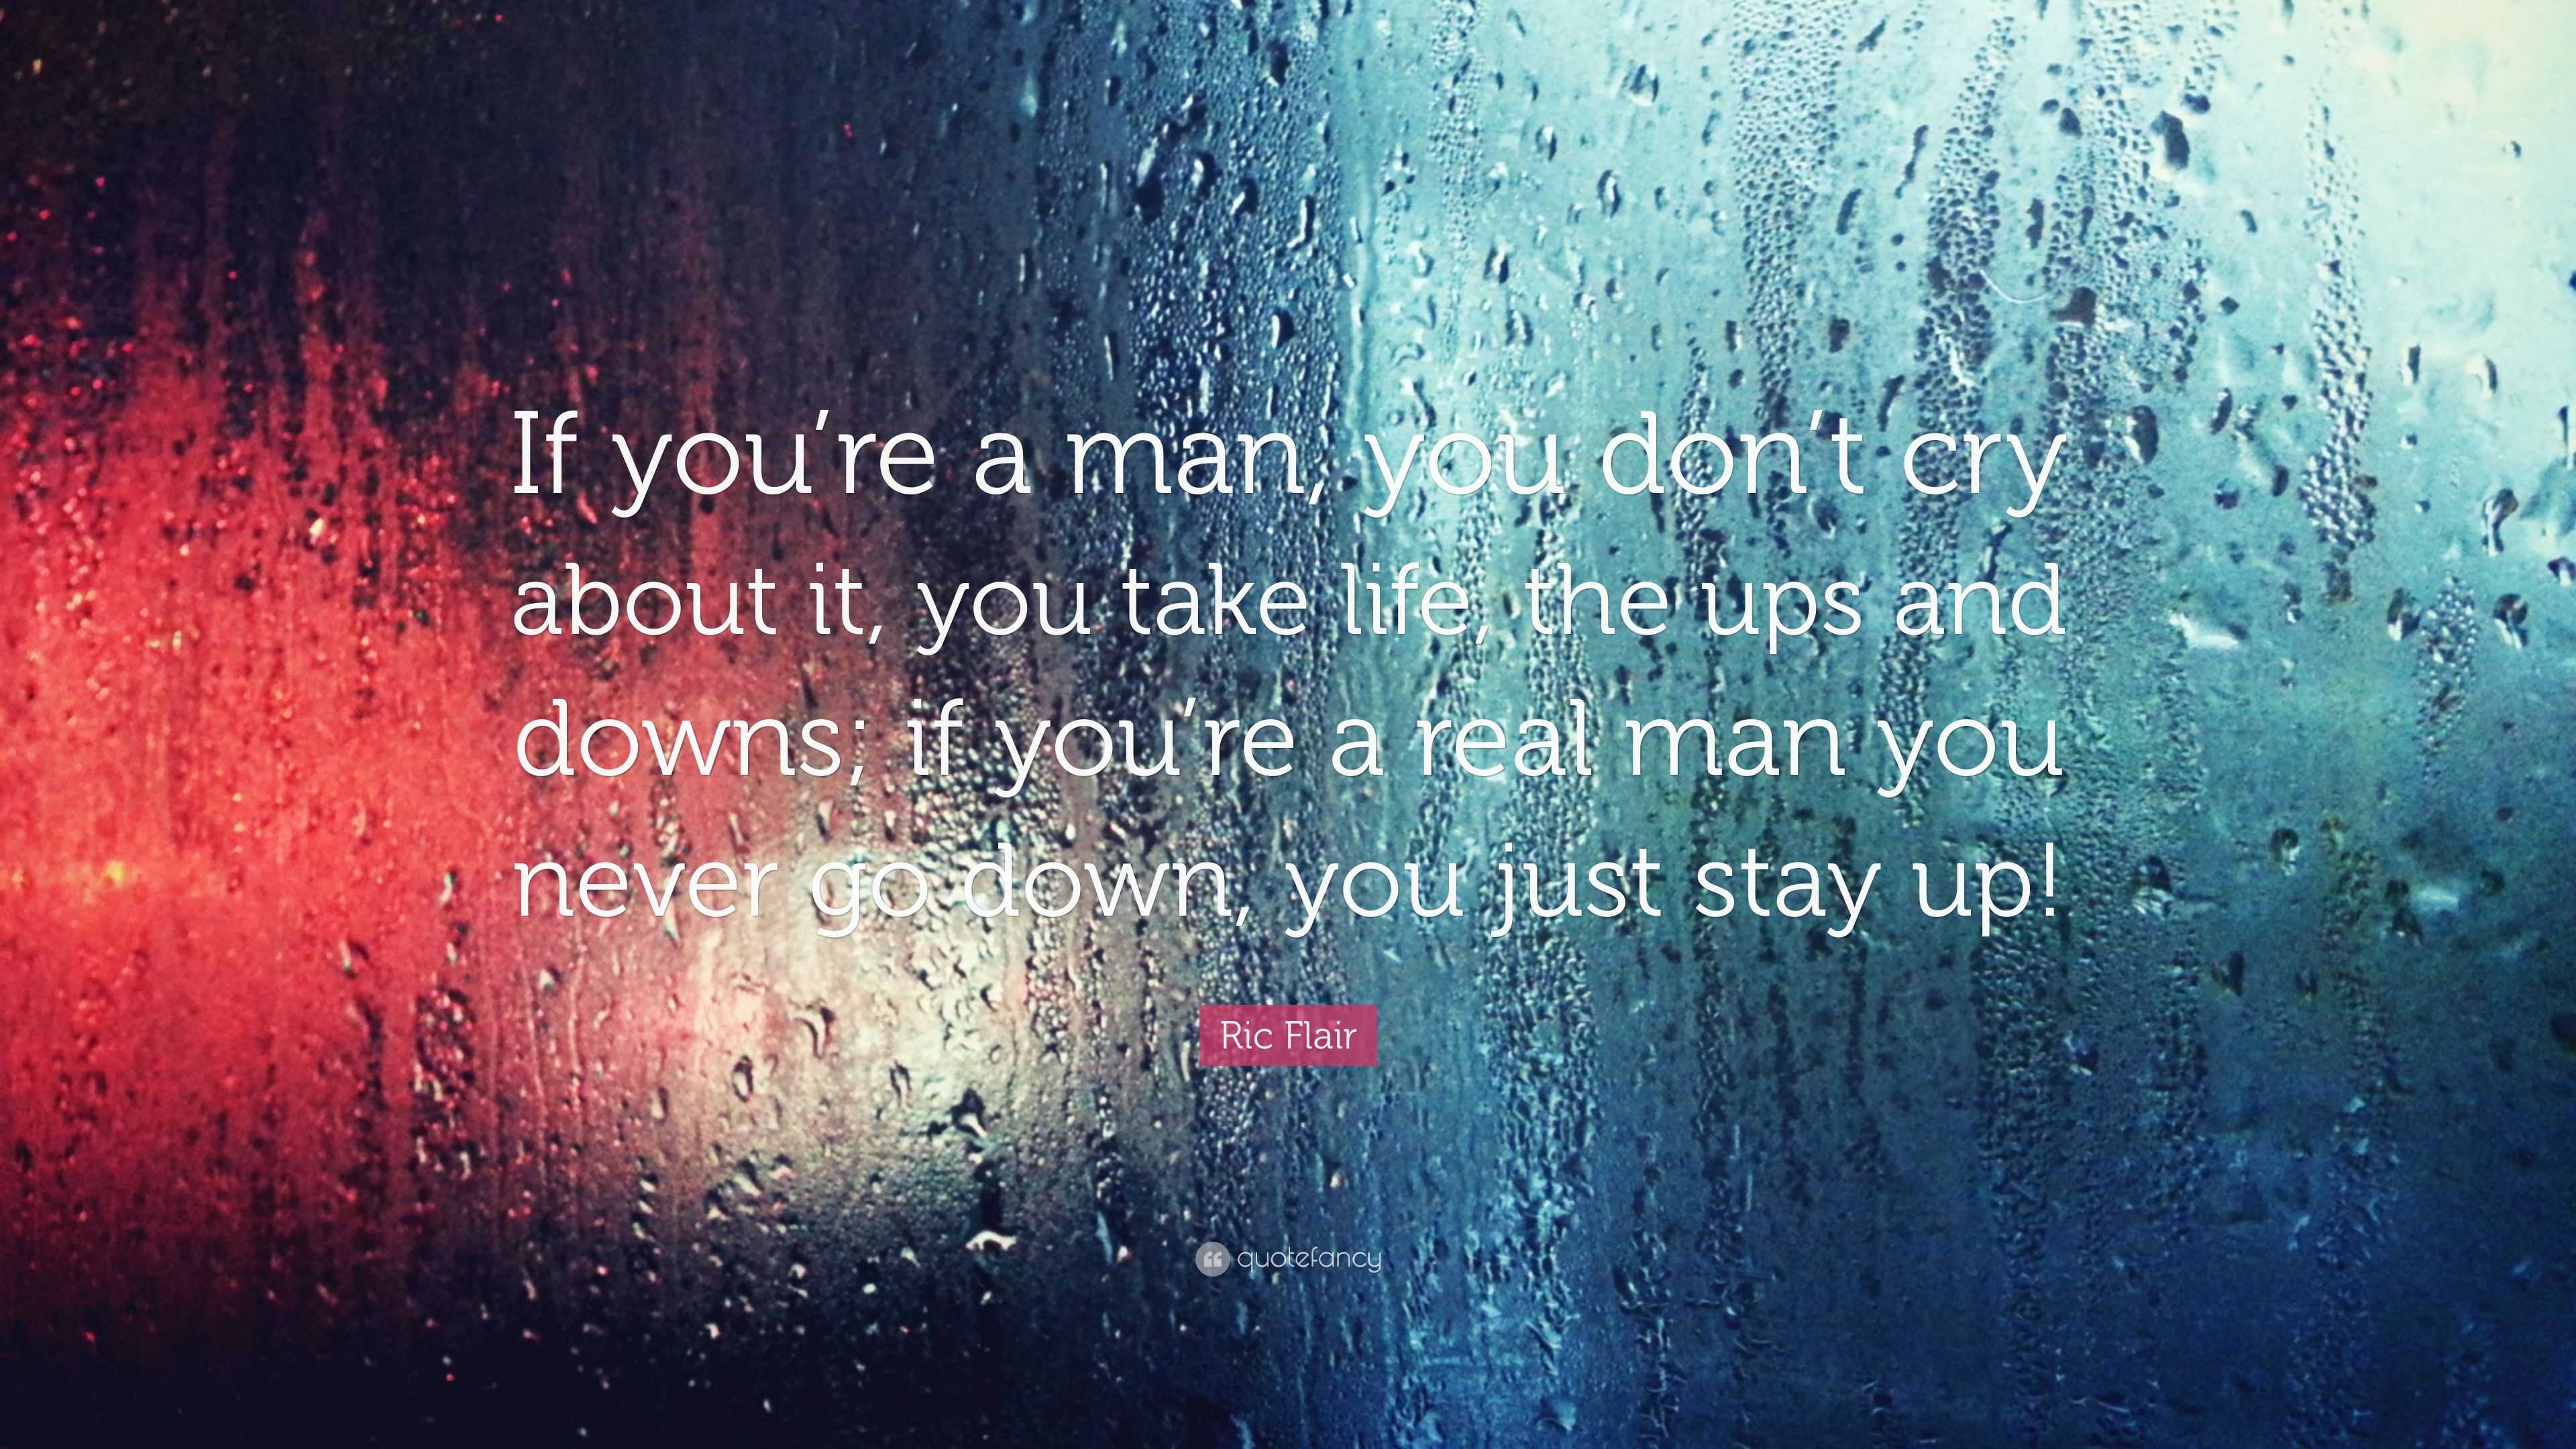 Ric Flair Quote: "If you're a man, you don't cry about it ...